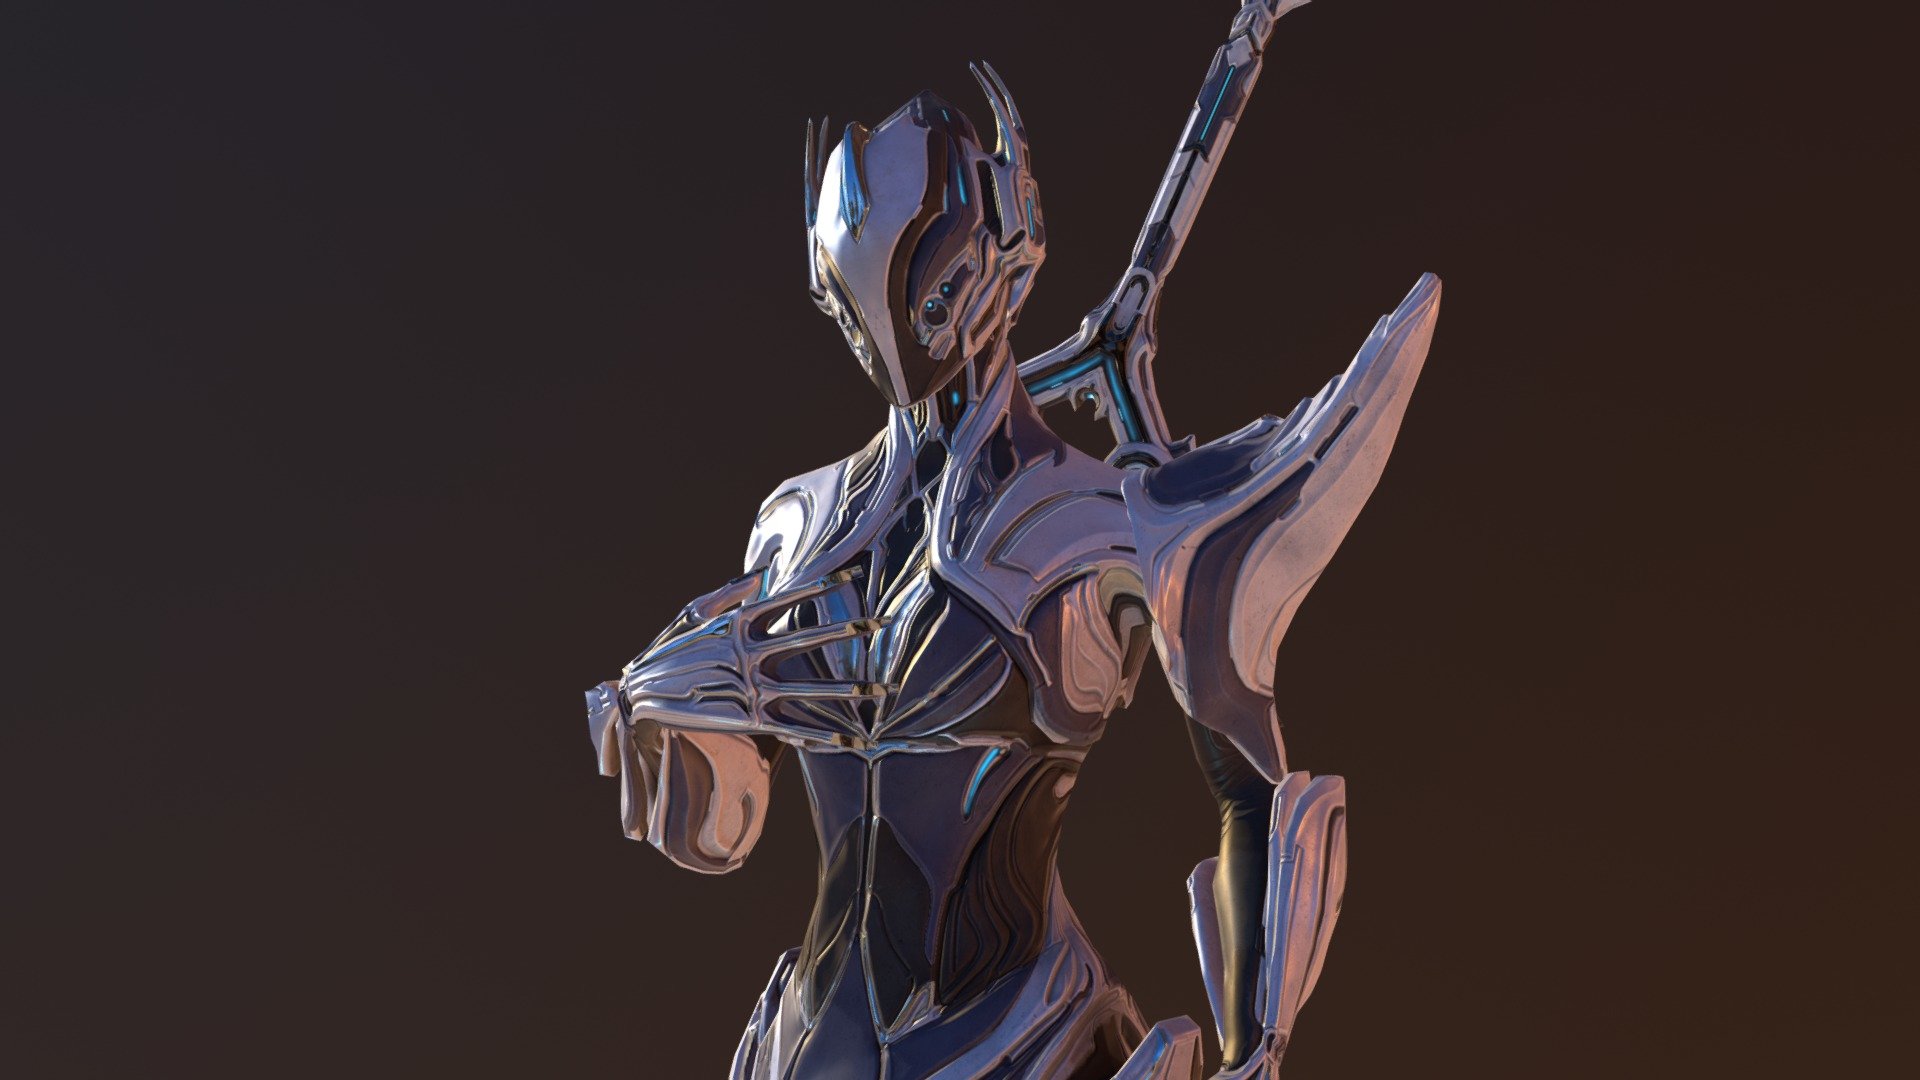 Skin and alt helmet for character Banshee and model swap for Galatine(Heavy Blades). 
Original character and body mesh belongs to Digital Extremes - Banshee Sonority and Magesty Galatine - 3D model by prosetisen 3d model